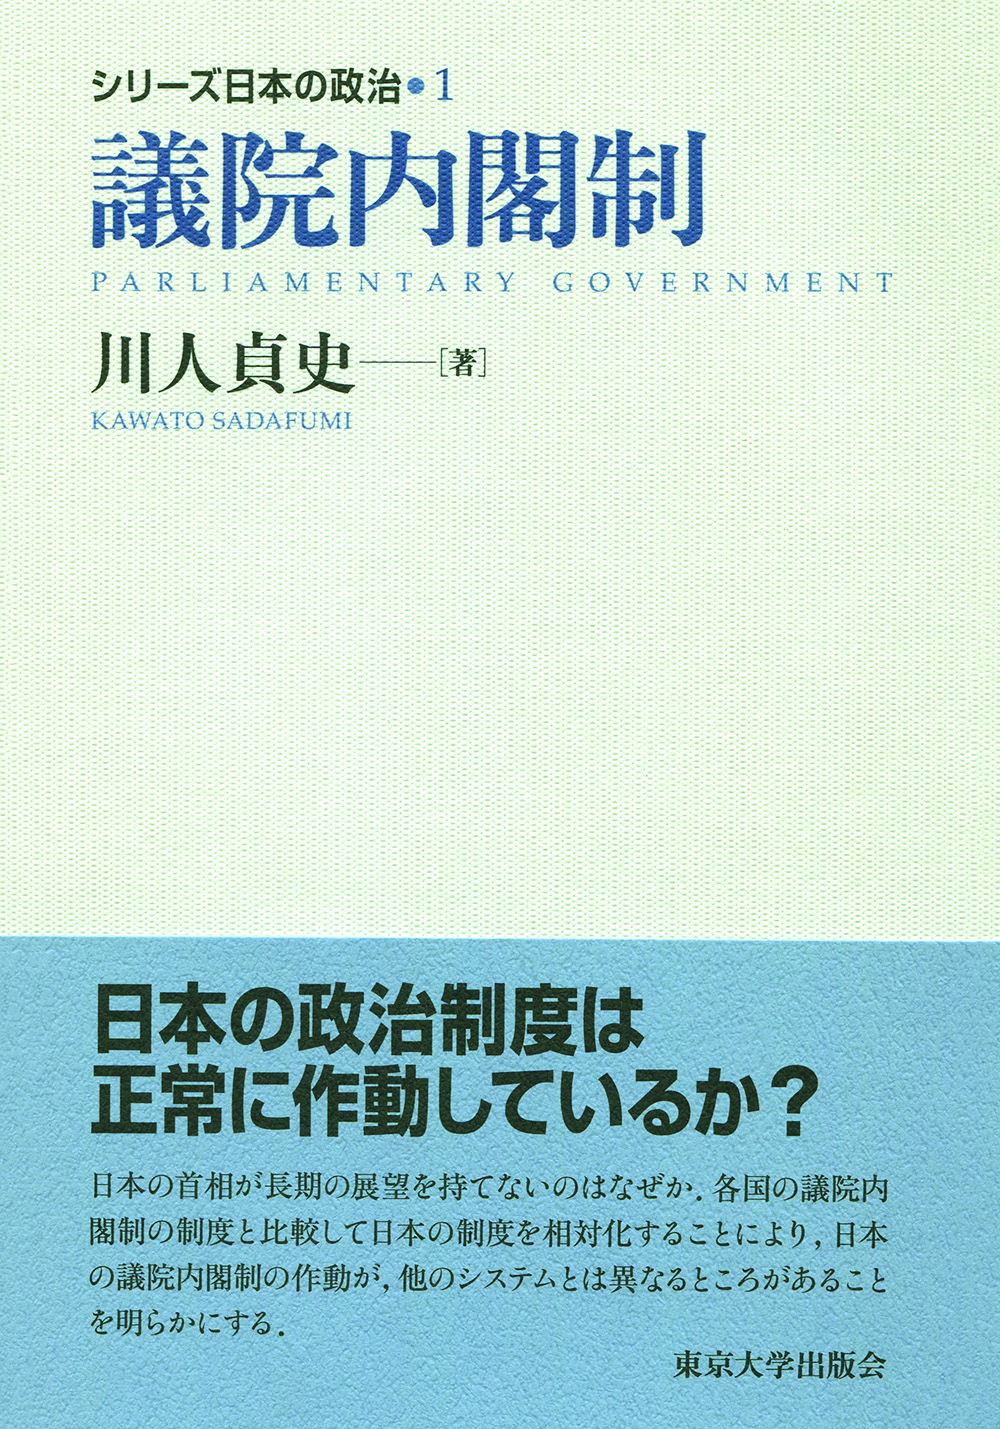 Book title and subtitles in blue on light blue cover